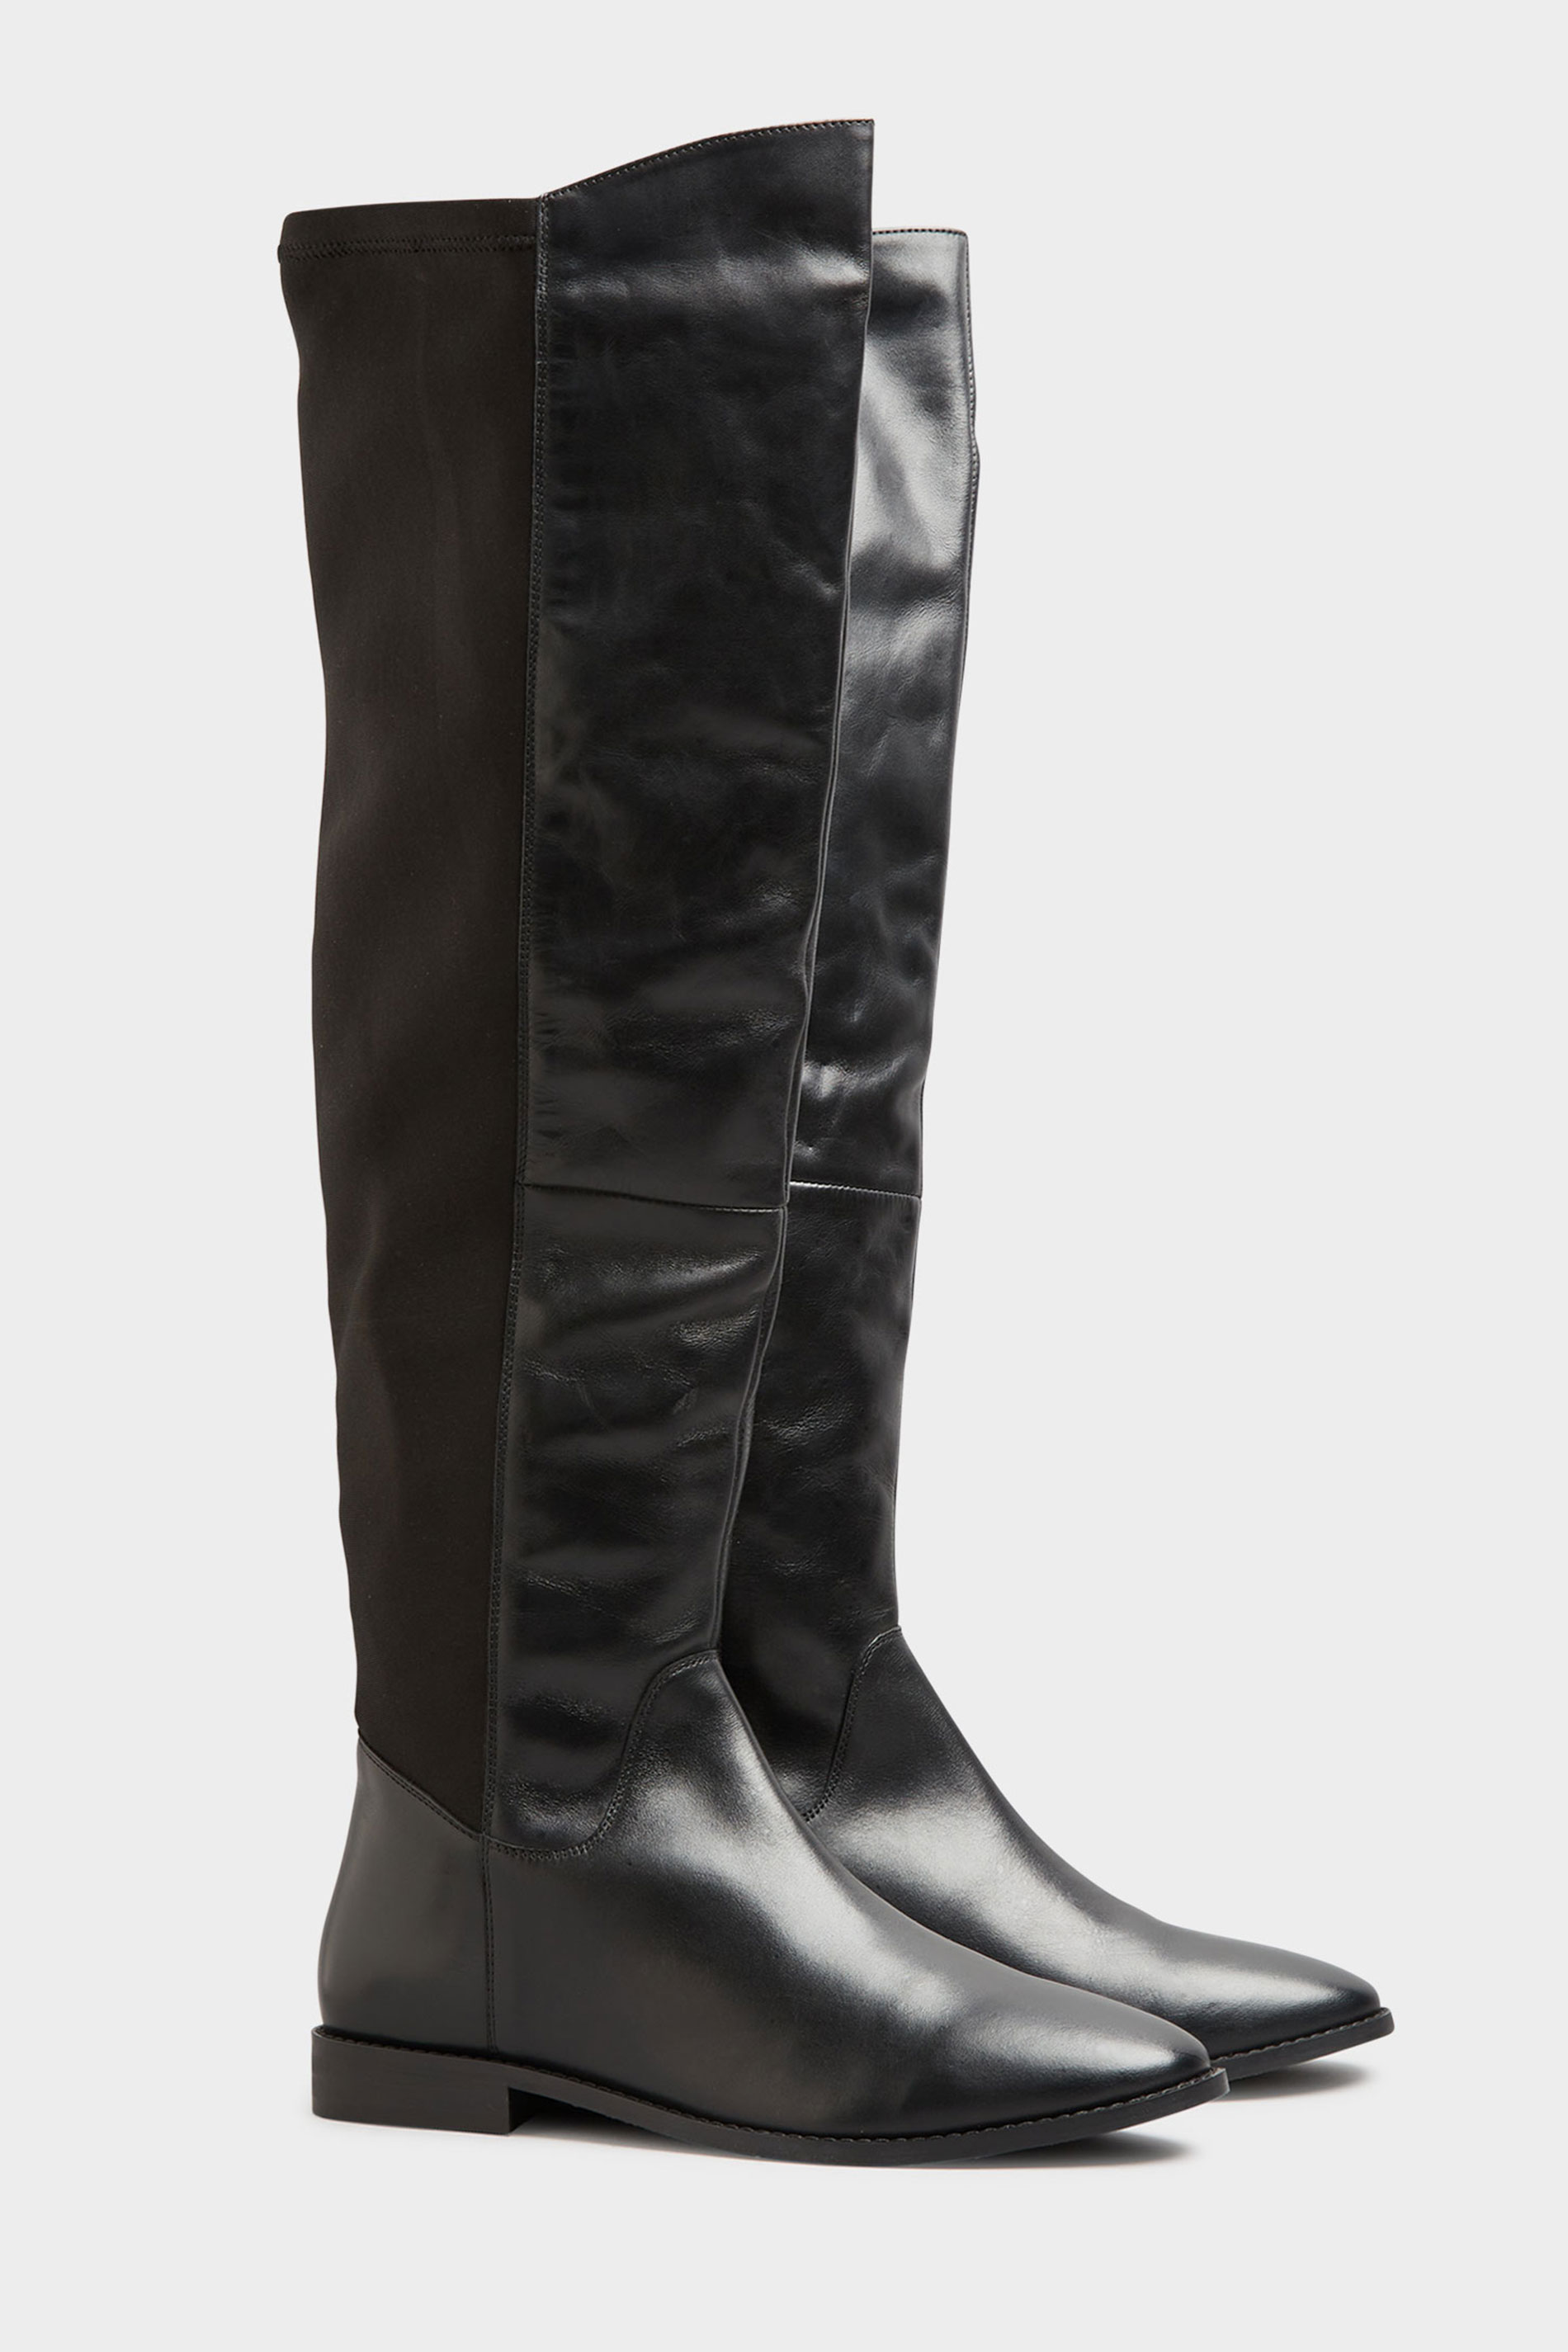 LTS Black Faux Leather Stretch Knee High Boots In Standard D Fit 1